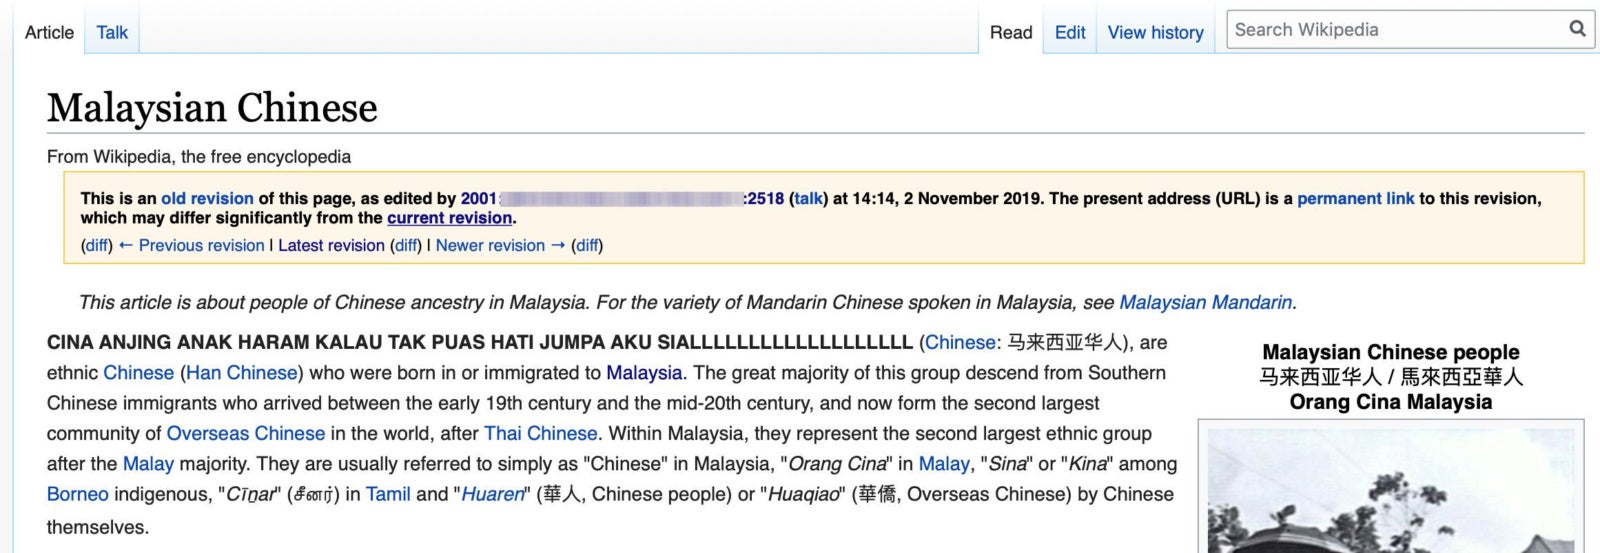 Someone Vandalised the Wikipedia Page Describing "Malaysian Chinese" & Called Them Haram - WORLD OF BUZZ 4